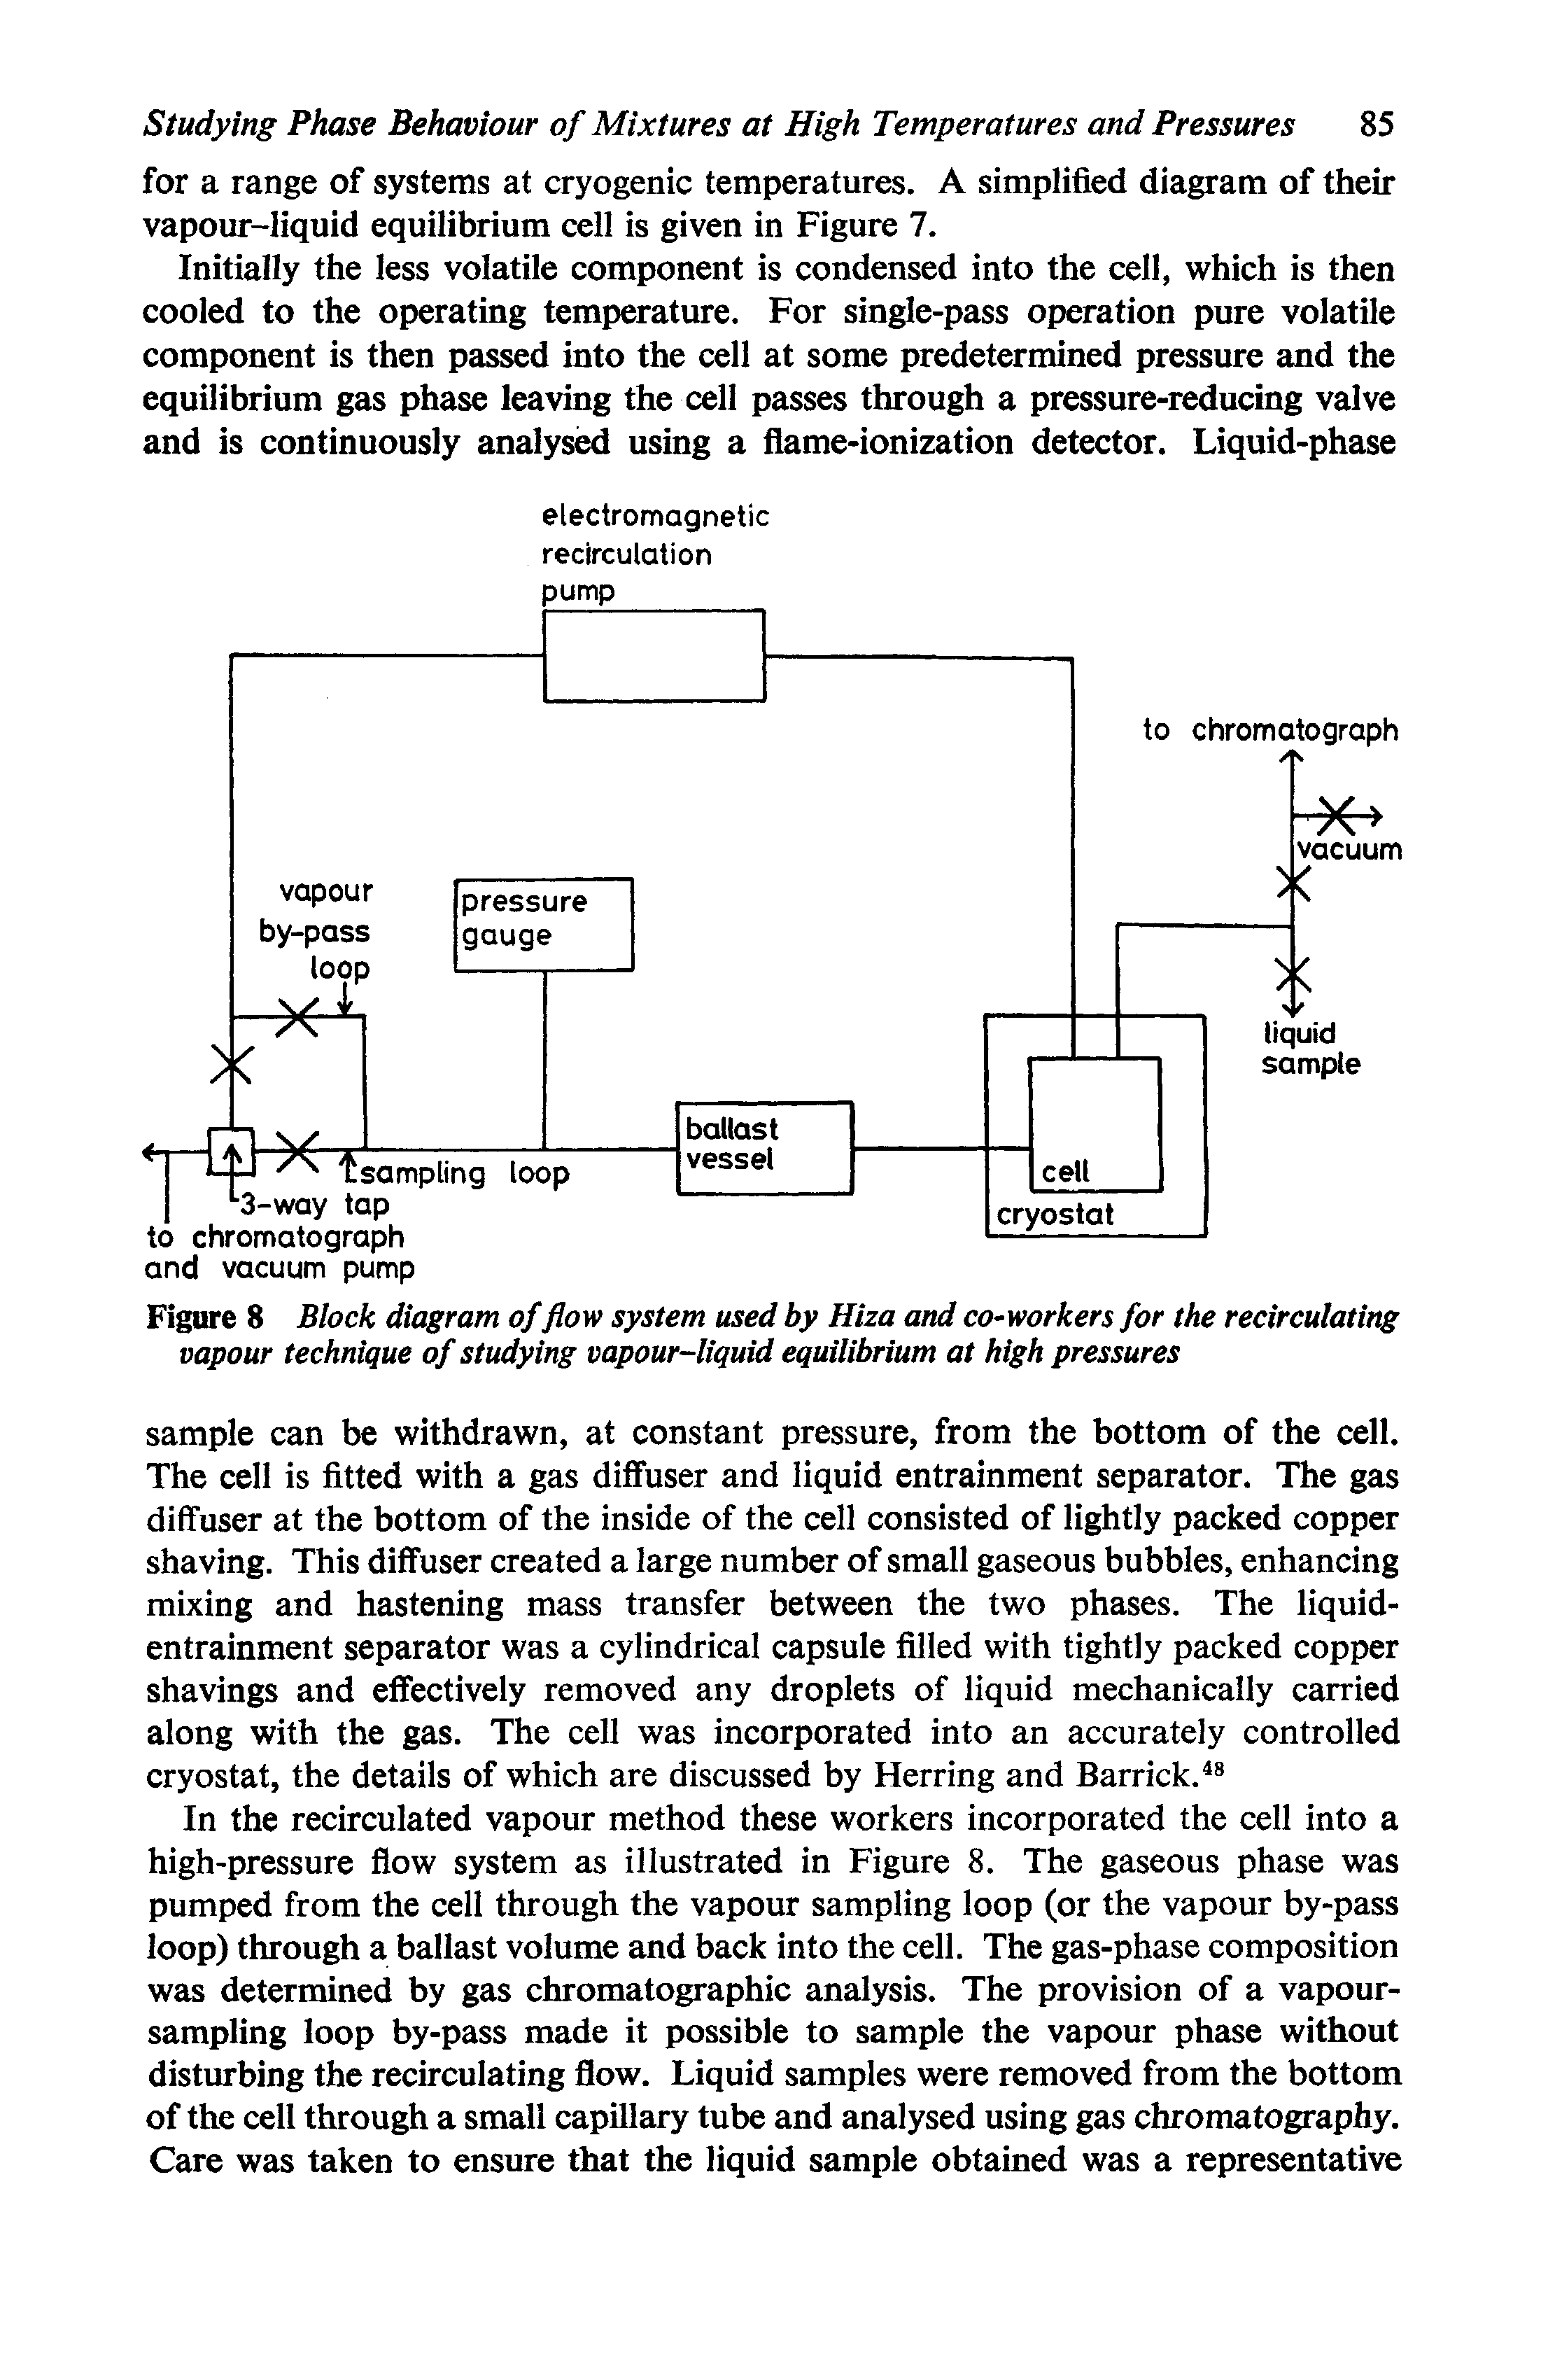 Figure 8 Block diagram of flow system used by Hiza and co-workers for the recirculating vapour technique of studying vapour-liquid equilibrium at high pressures...